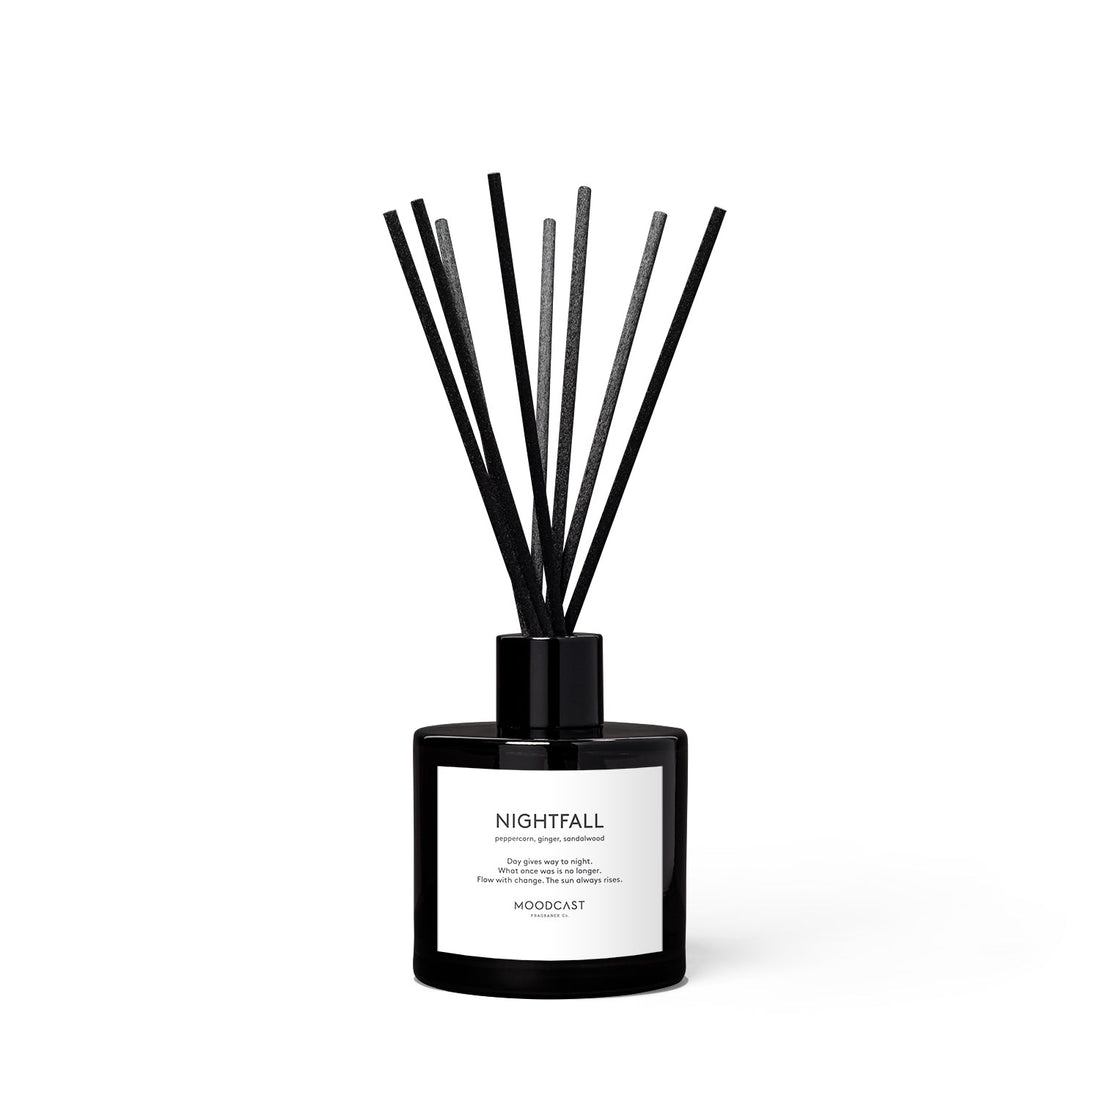 Nightfall - Night & Day Collection (Black & White) - 3.4fl oz/100ml Glass Reed Diffuser - Key Notes: Peppercorn, Ginger, Sandalwood